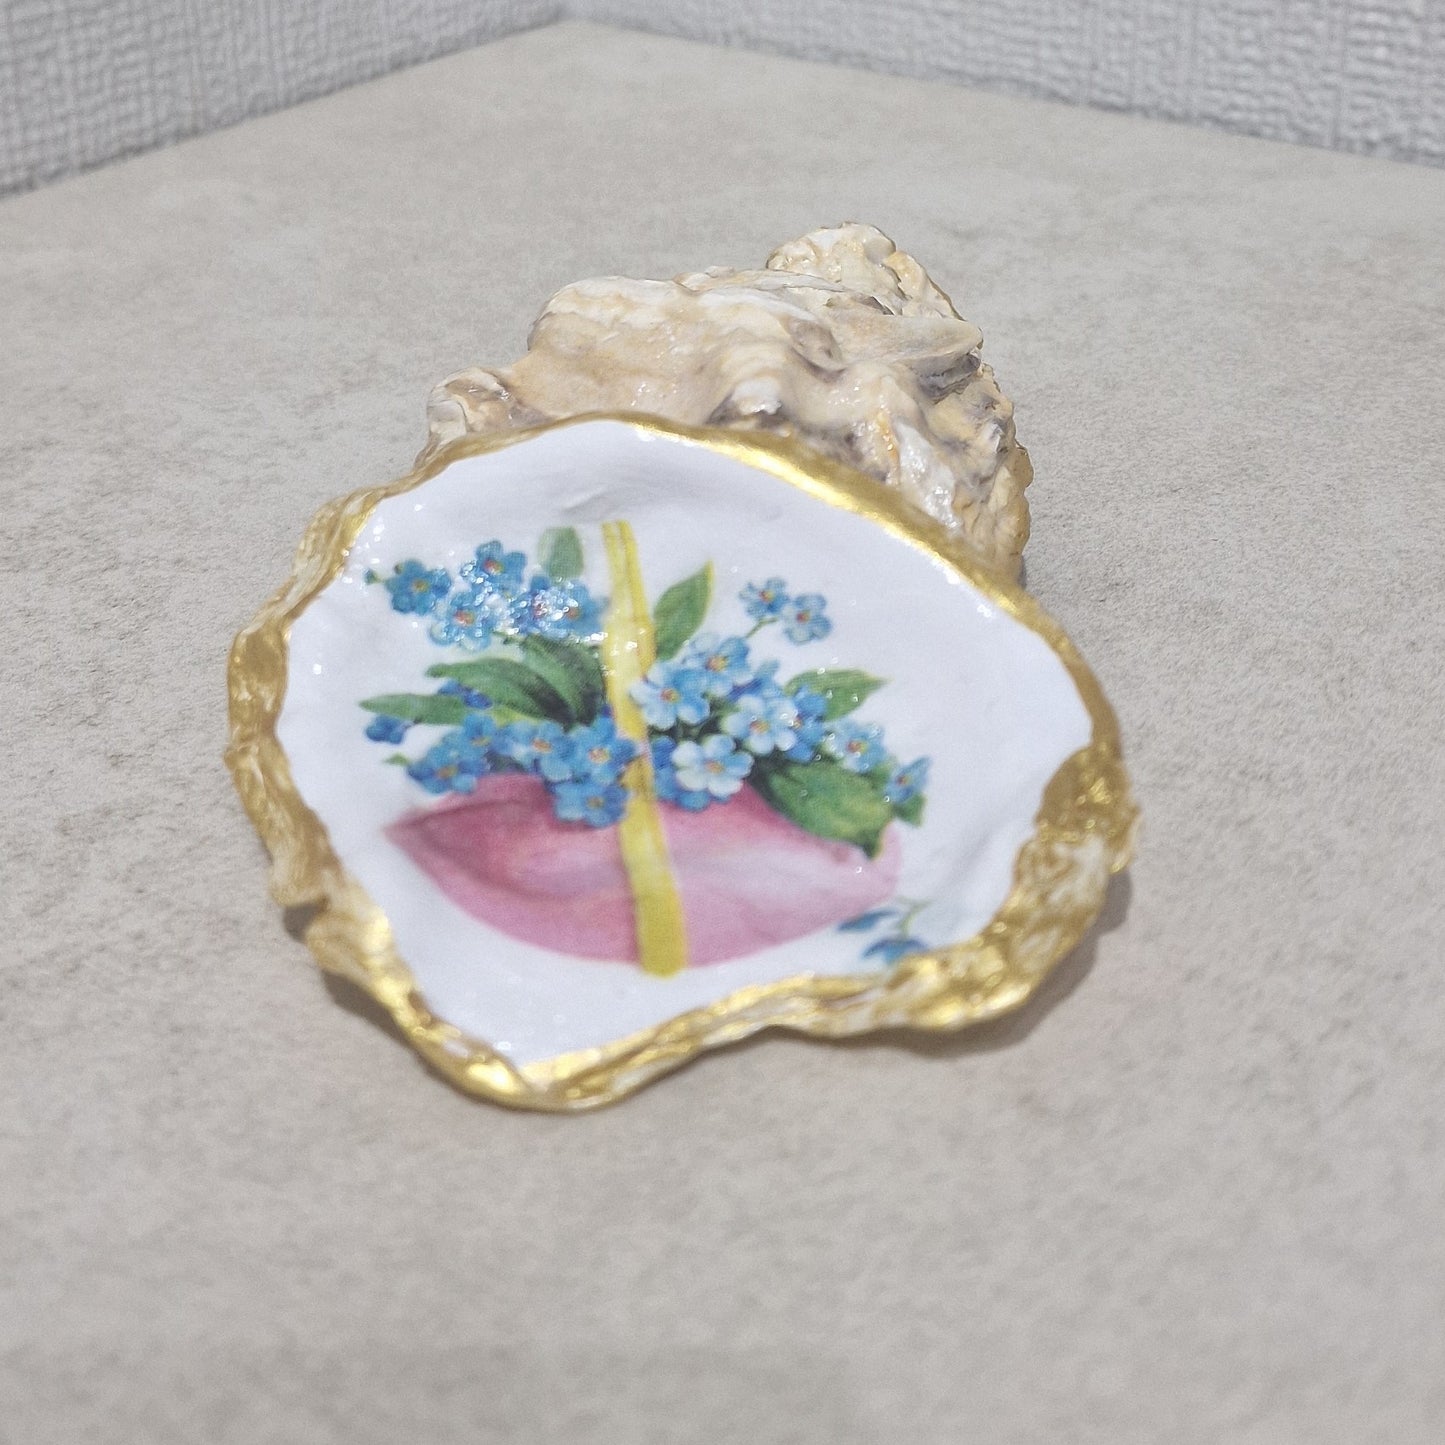 NEW Forget me Nots Easter Egg Oyster Shell Trinket Dish Jewellery Holder Gift